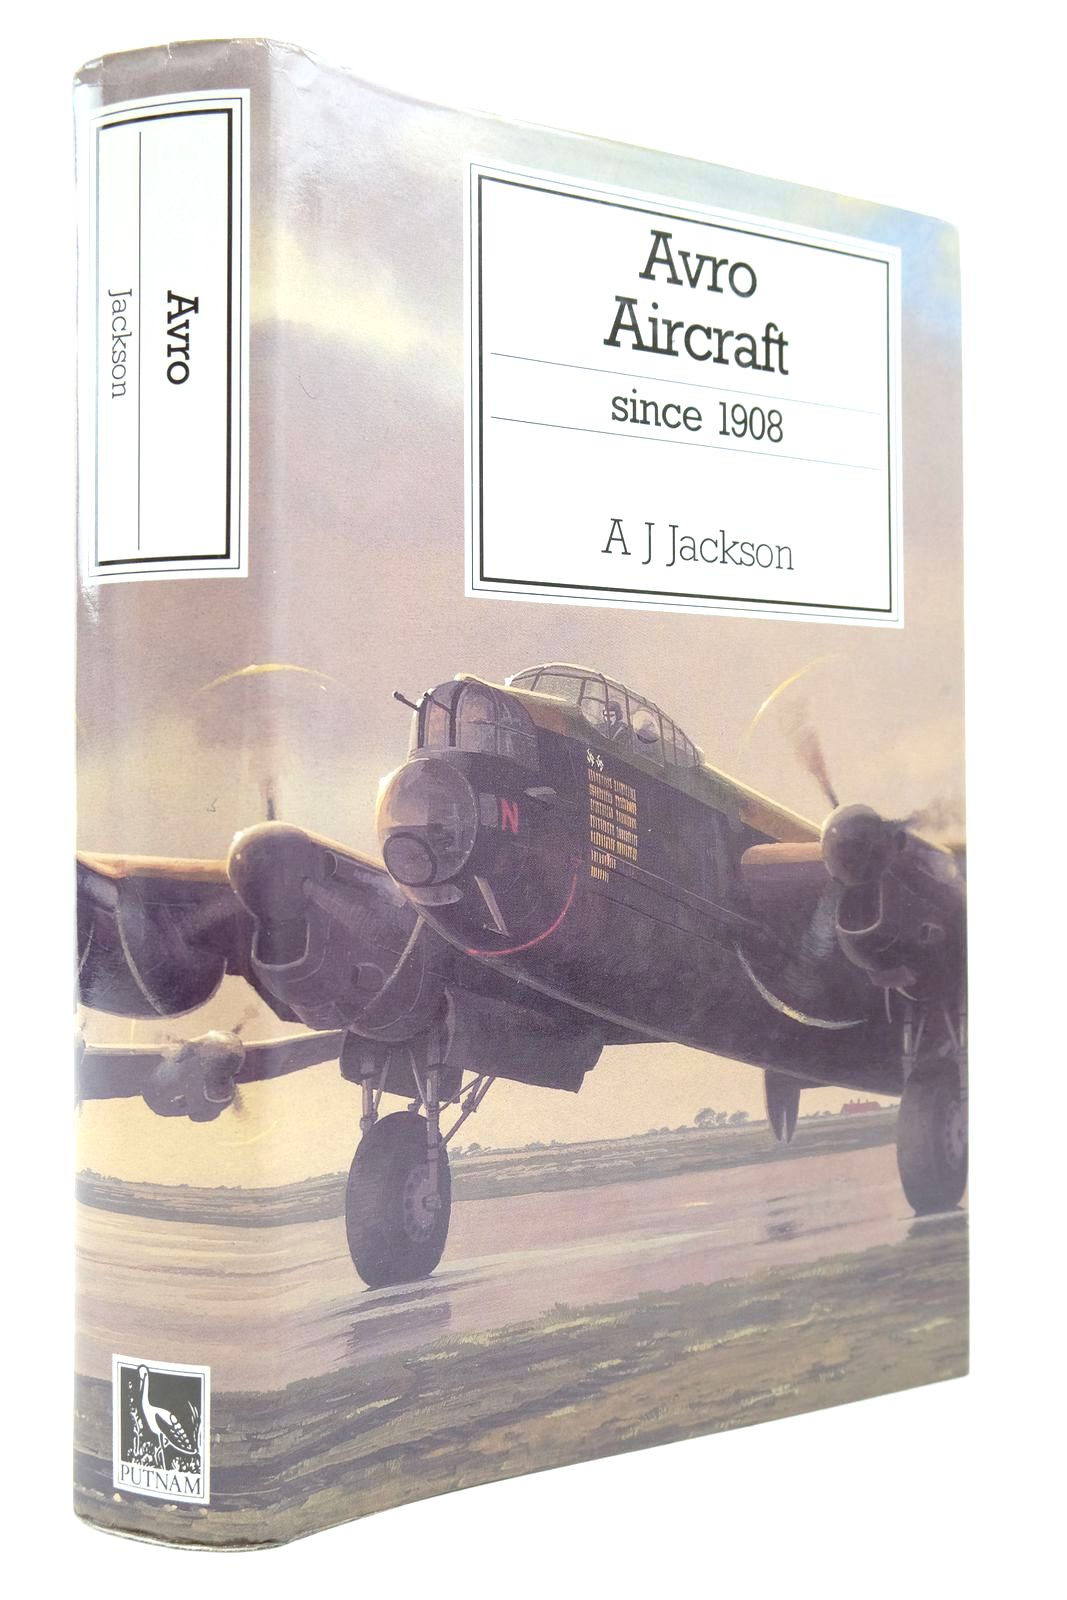 Photo of AVRO AIRCRAFT SINCE 1908 written by Jackson, A.J. Jackson, R.T. published by Putnam (STOCK CODE: 2139167)  for sale by Stella & Rose's Books